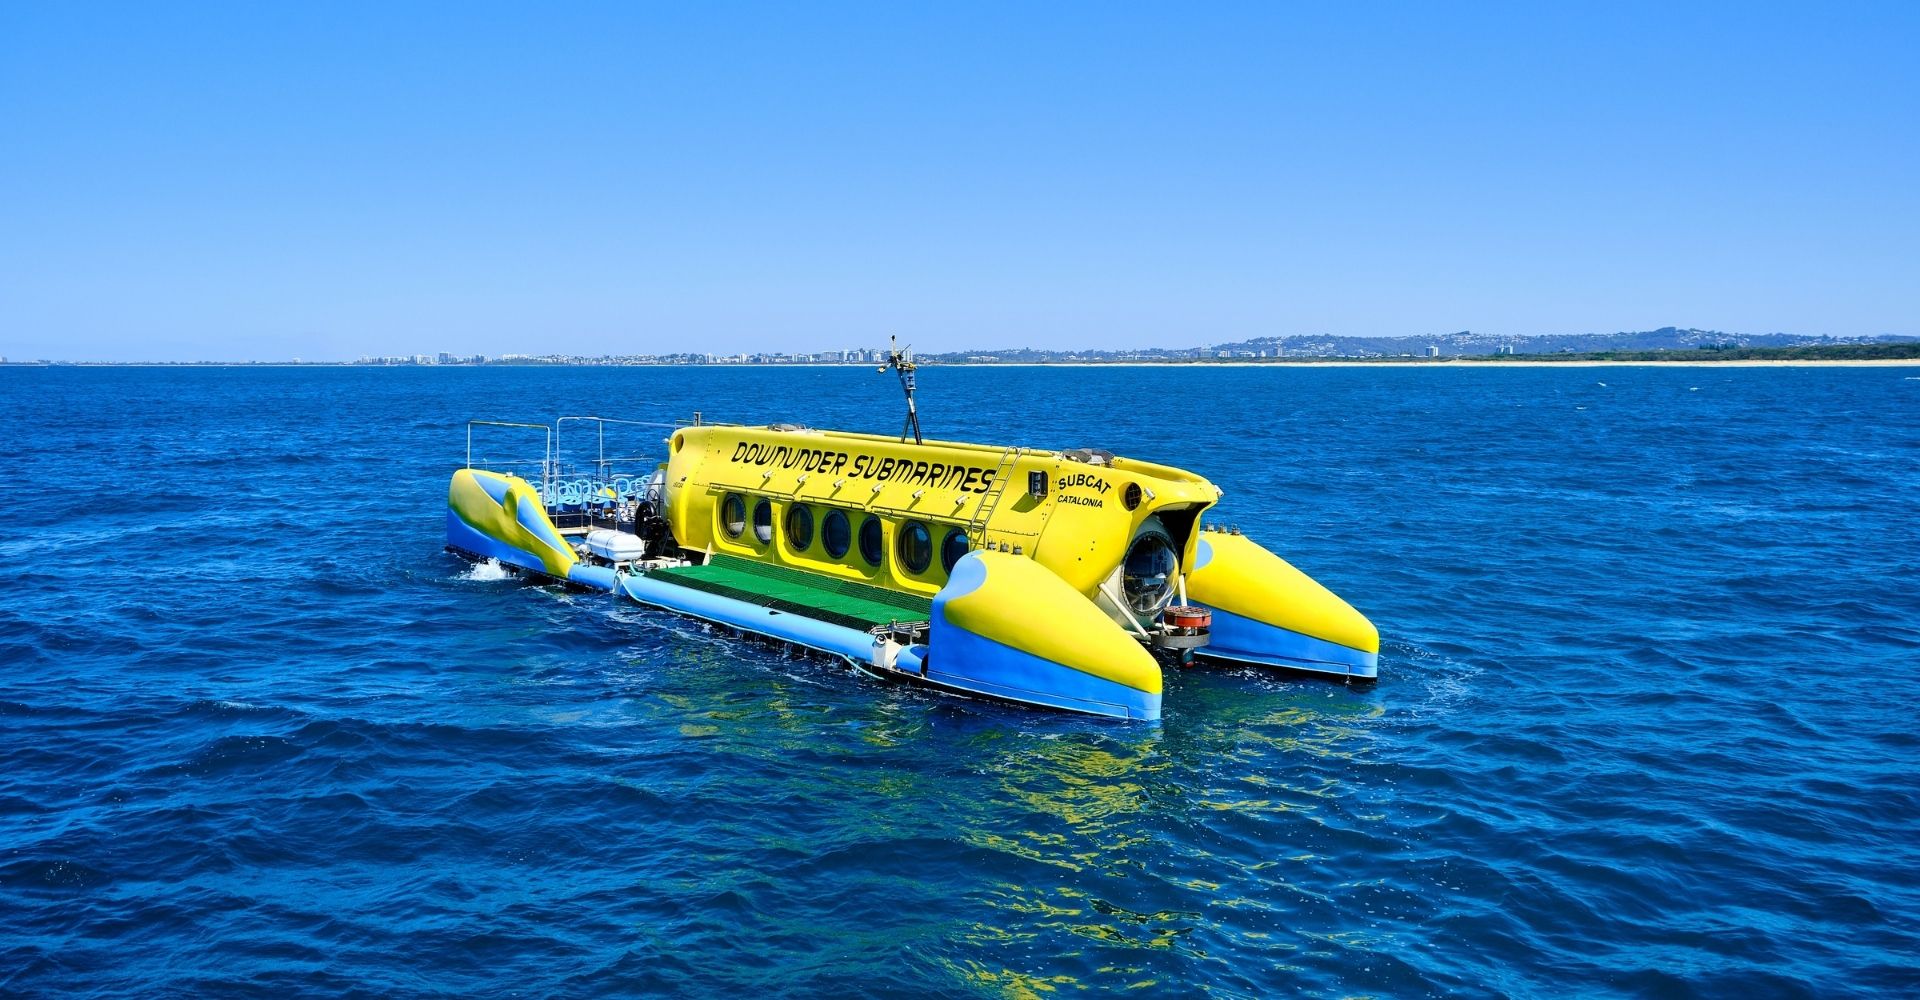 Let’s all dive in a yellow submarine! Australia’s first fully submersible hybrid tourist submarine launches on the Sunshine Coast